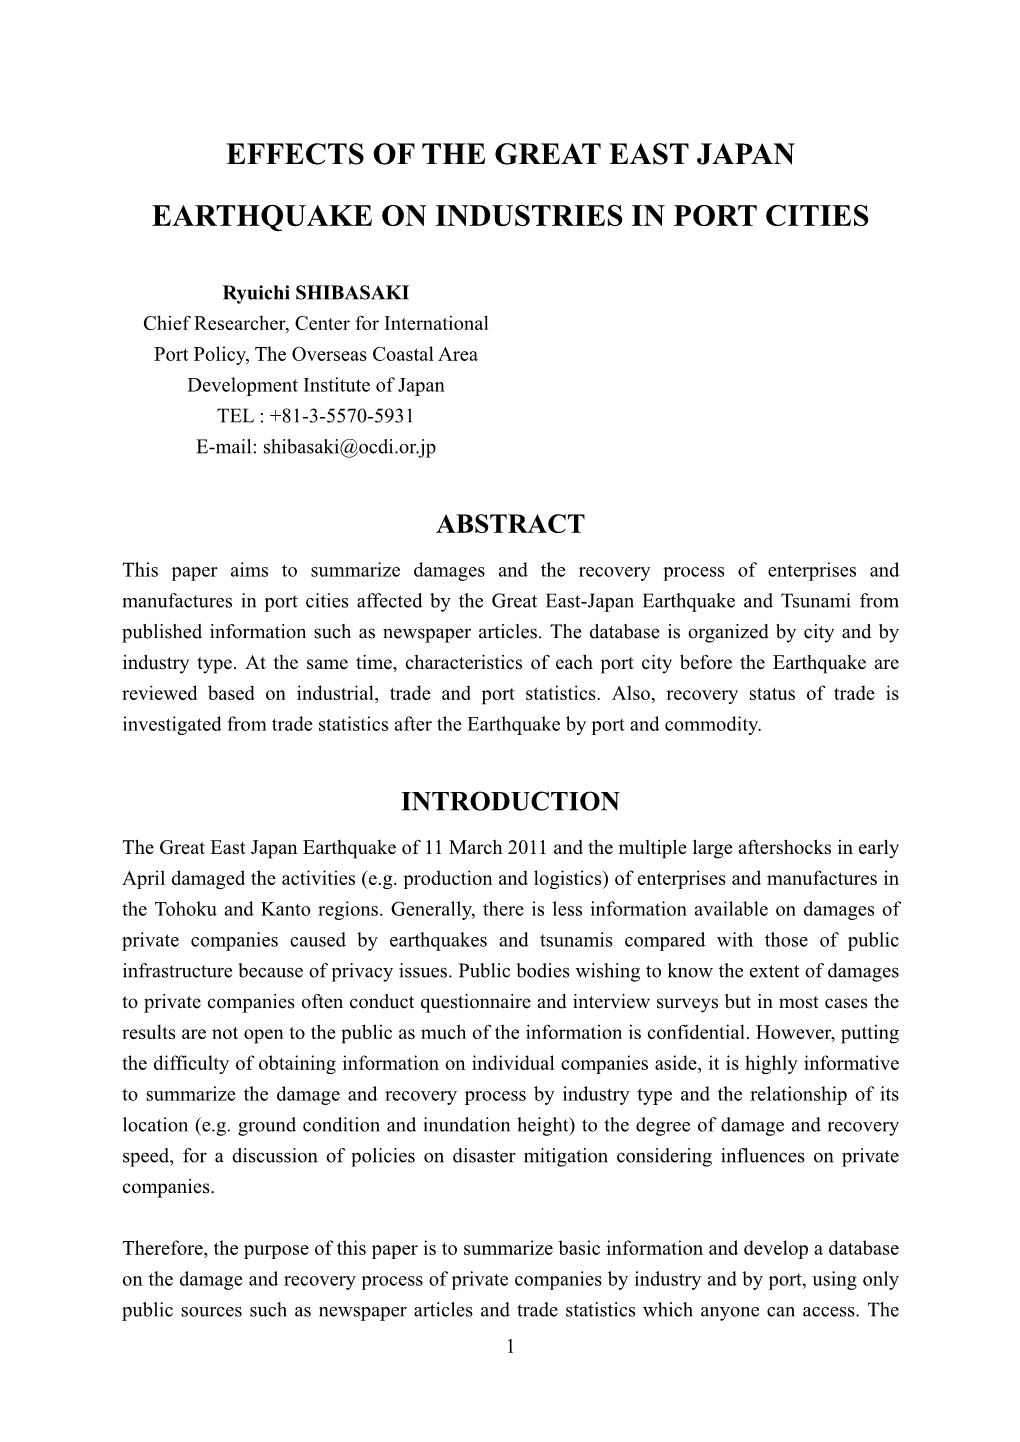 Effects of the Great East Japan Earthquake on Industries in Port Cities